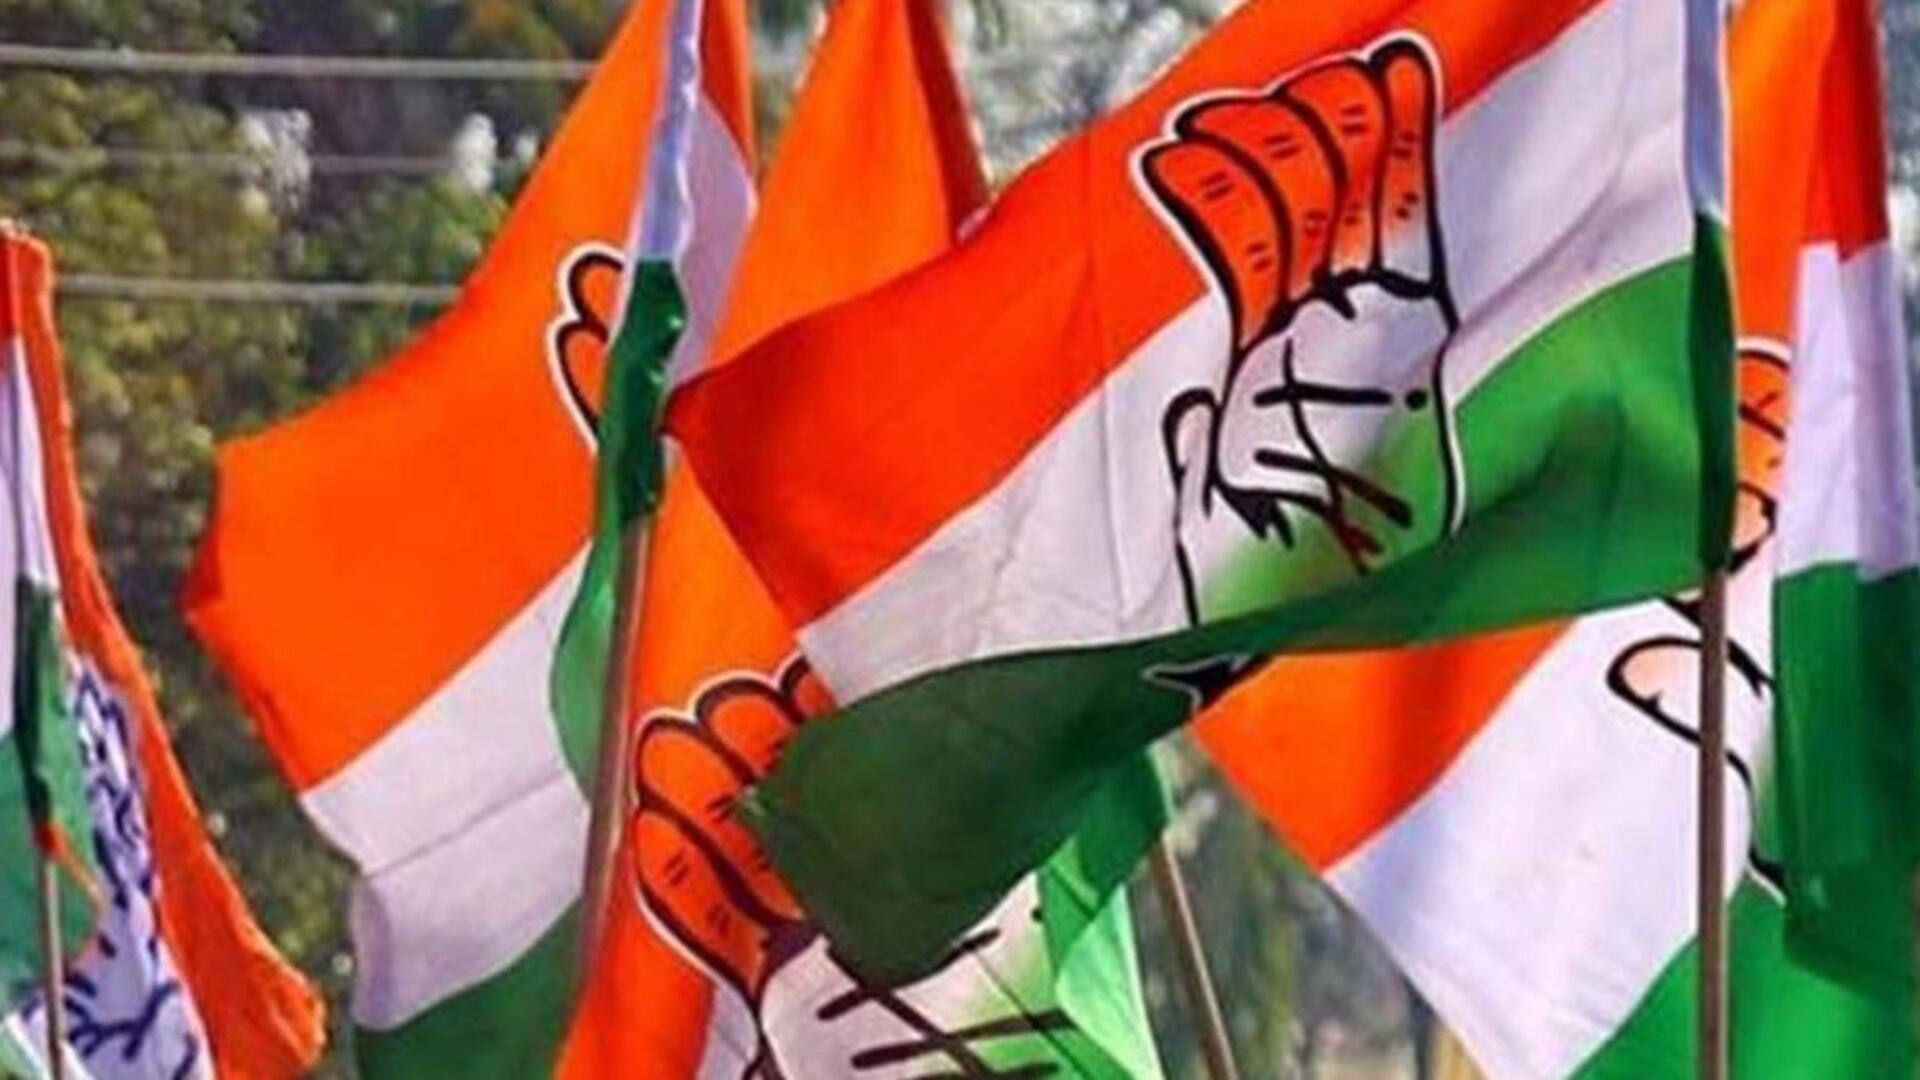 Arunachal Pradesh Assembly polls: Congress releases first list of candidates 